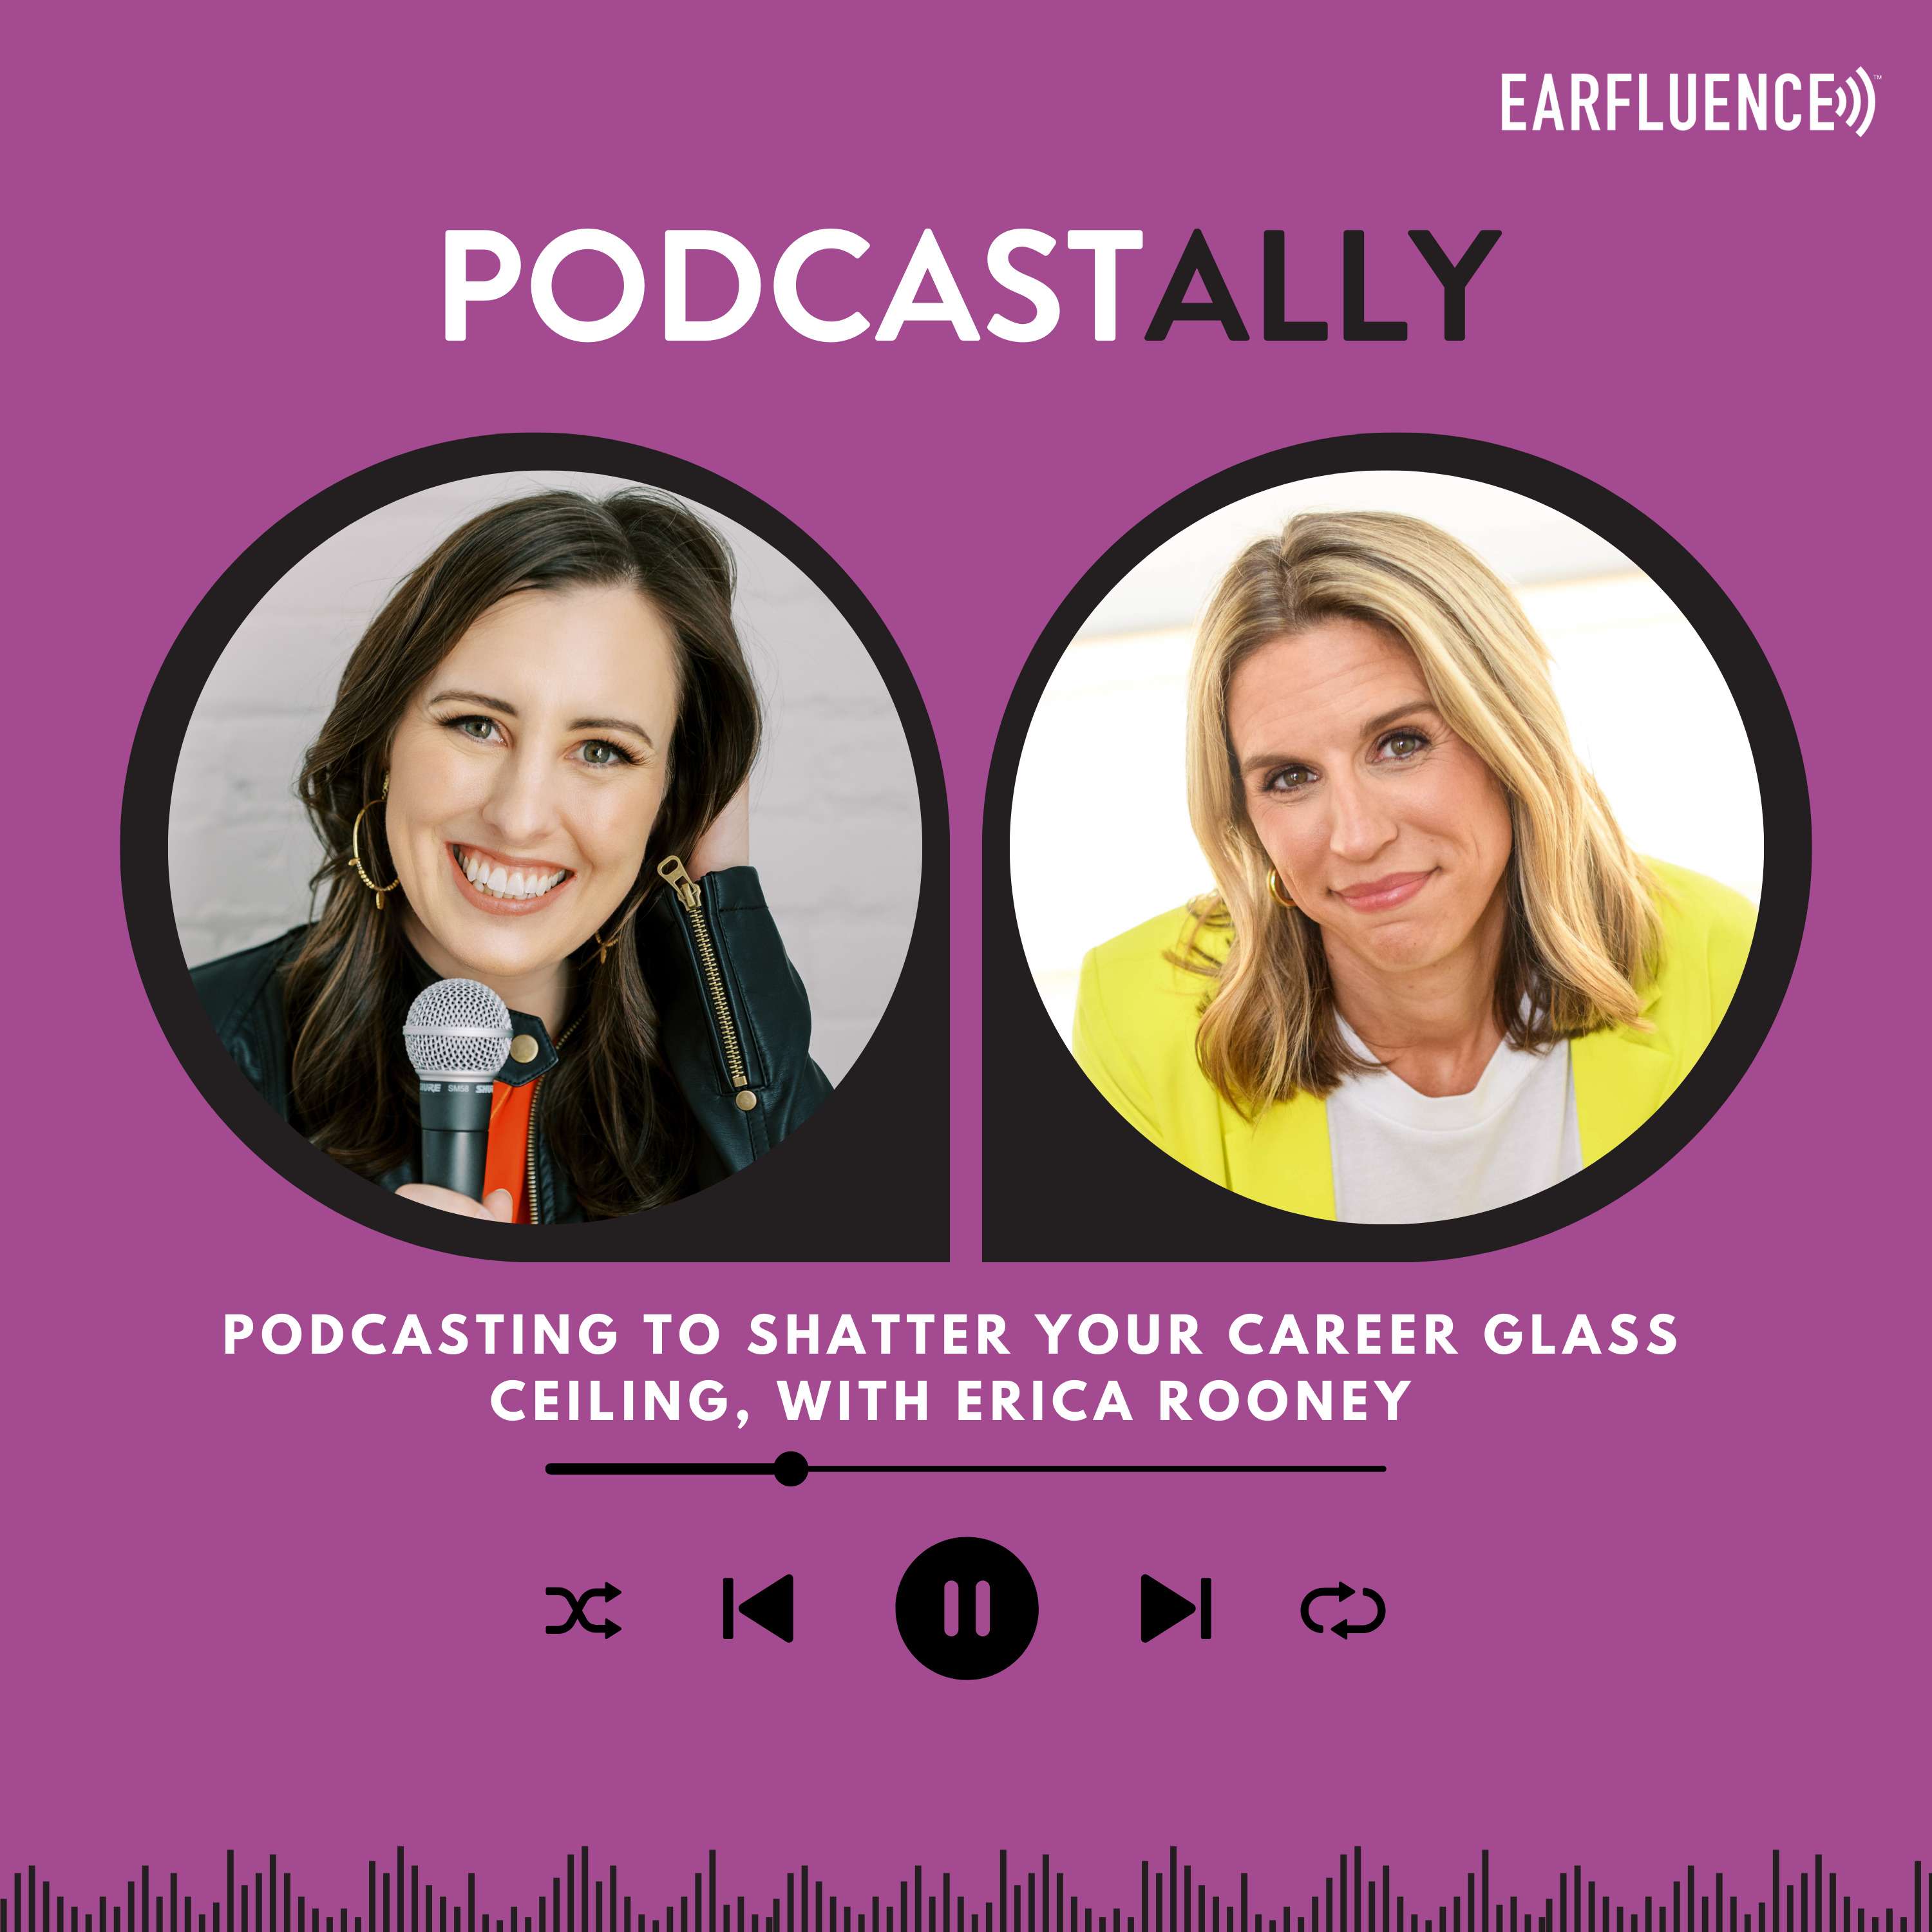 Podcasting to Shatter Your Career Glass Ceiling, with Erica Rooney